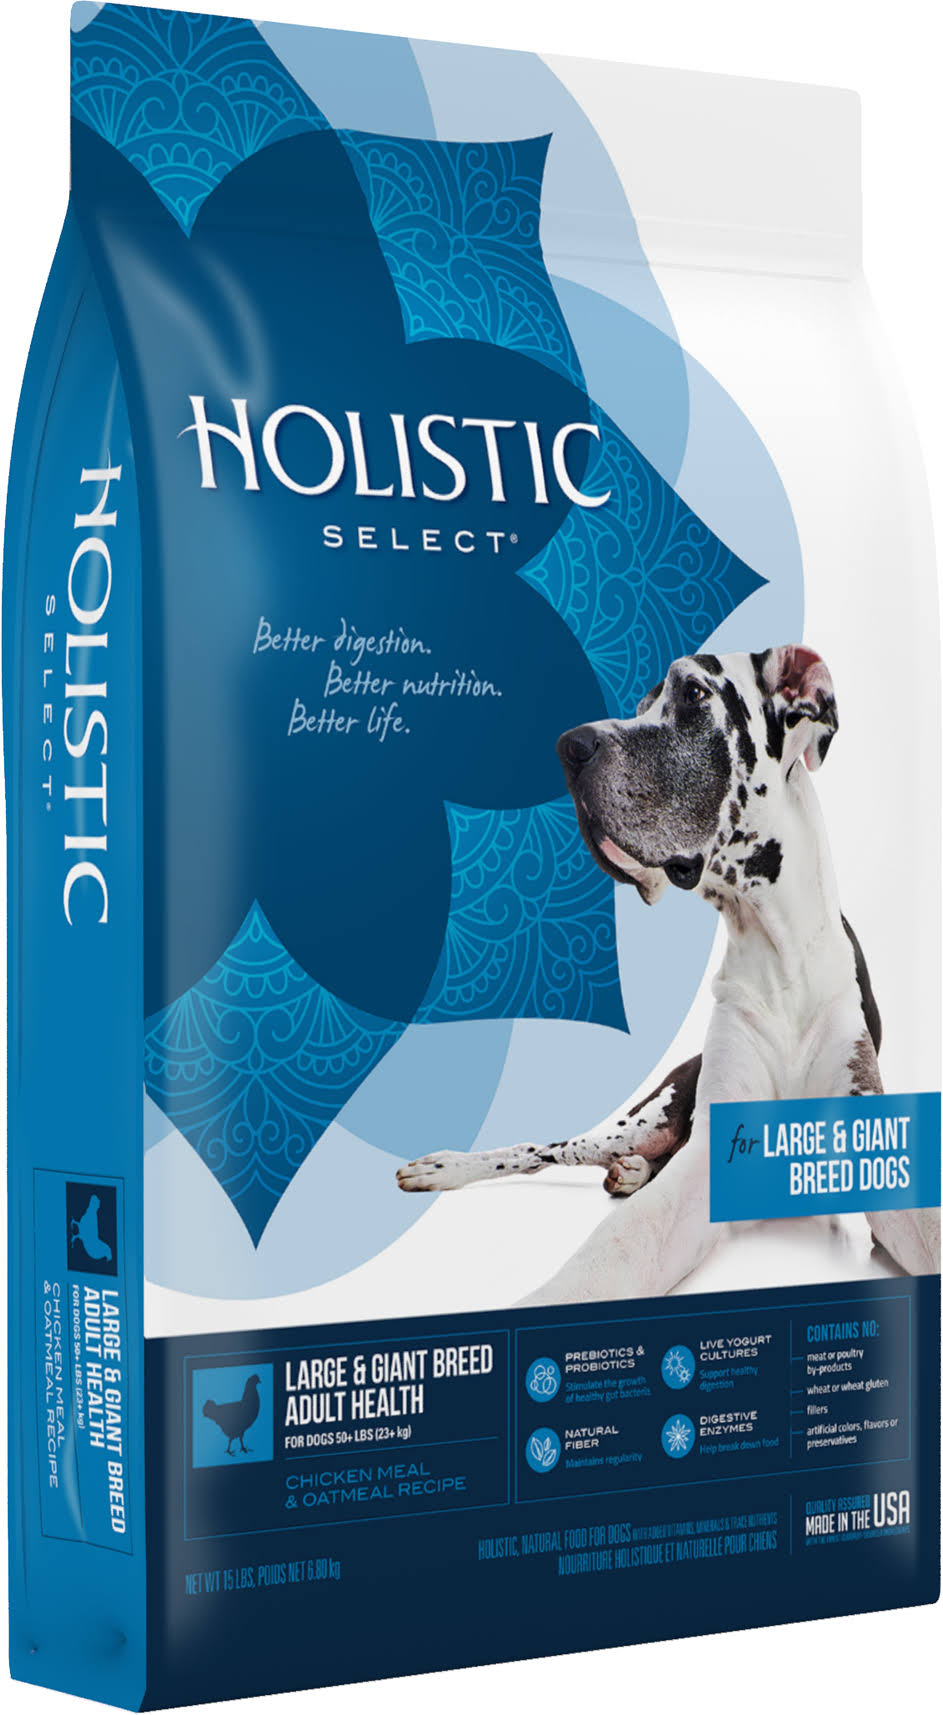 Holistic Select Large & Giant Breed Adult Dry Dog Food - Chicken Meal Recipe, 30 lb